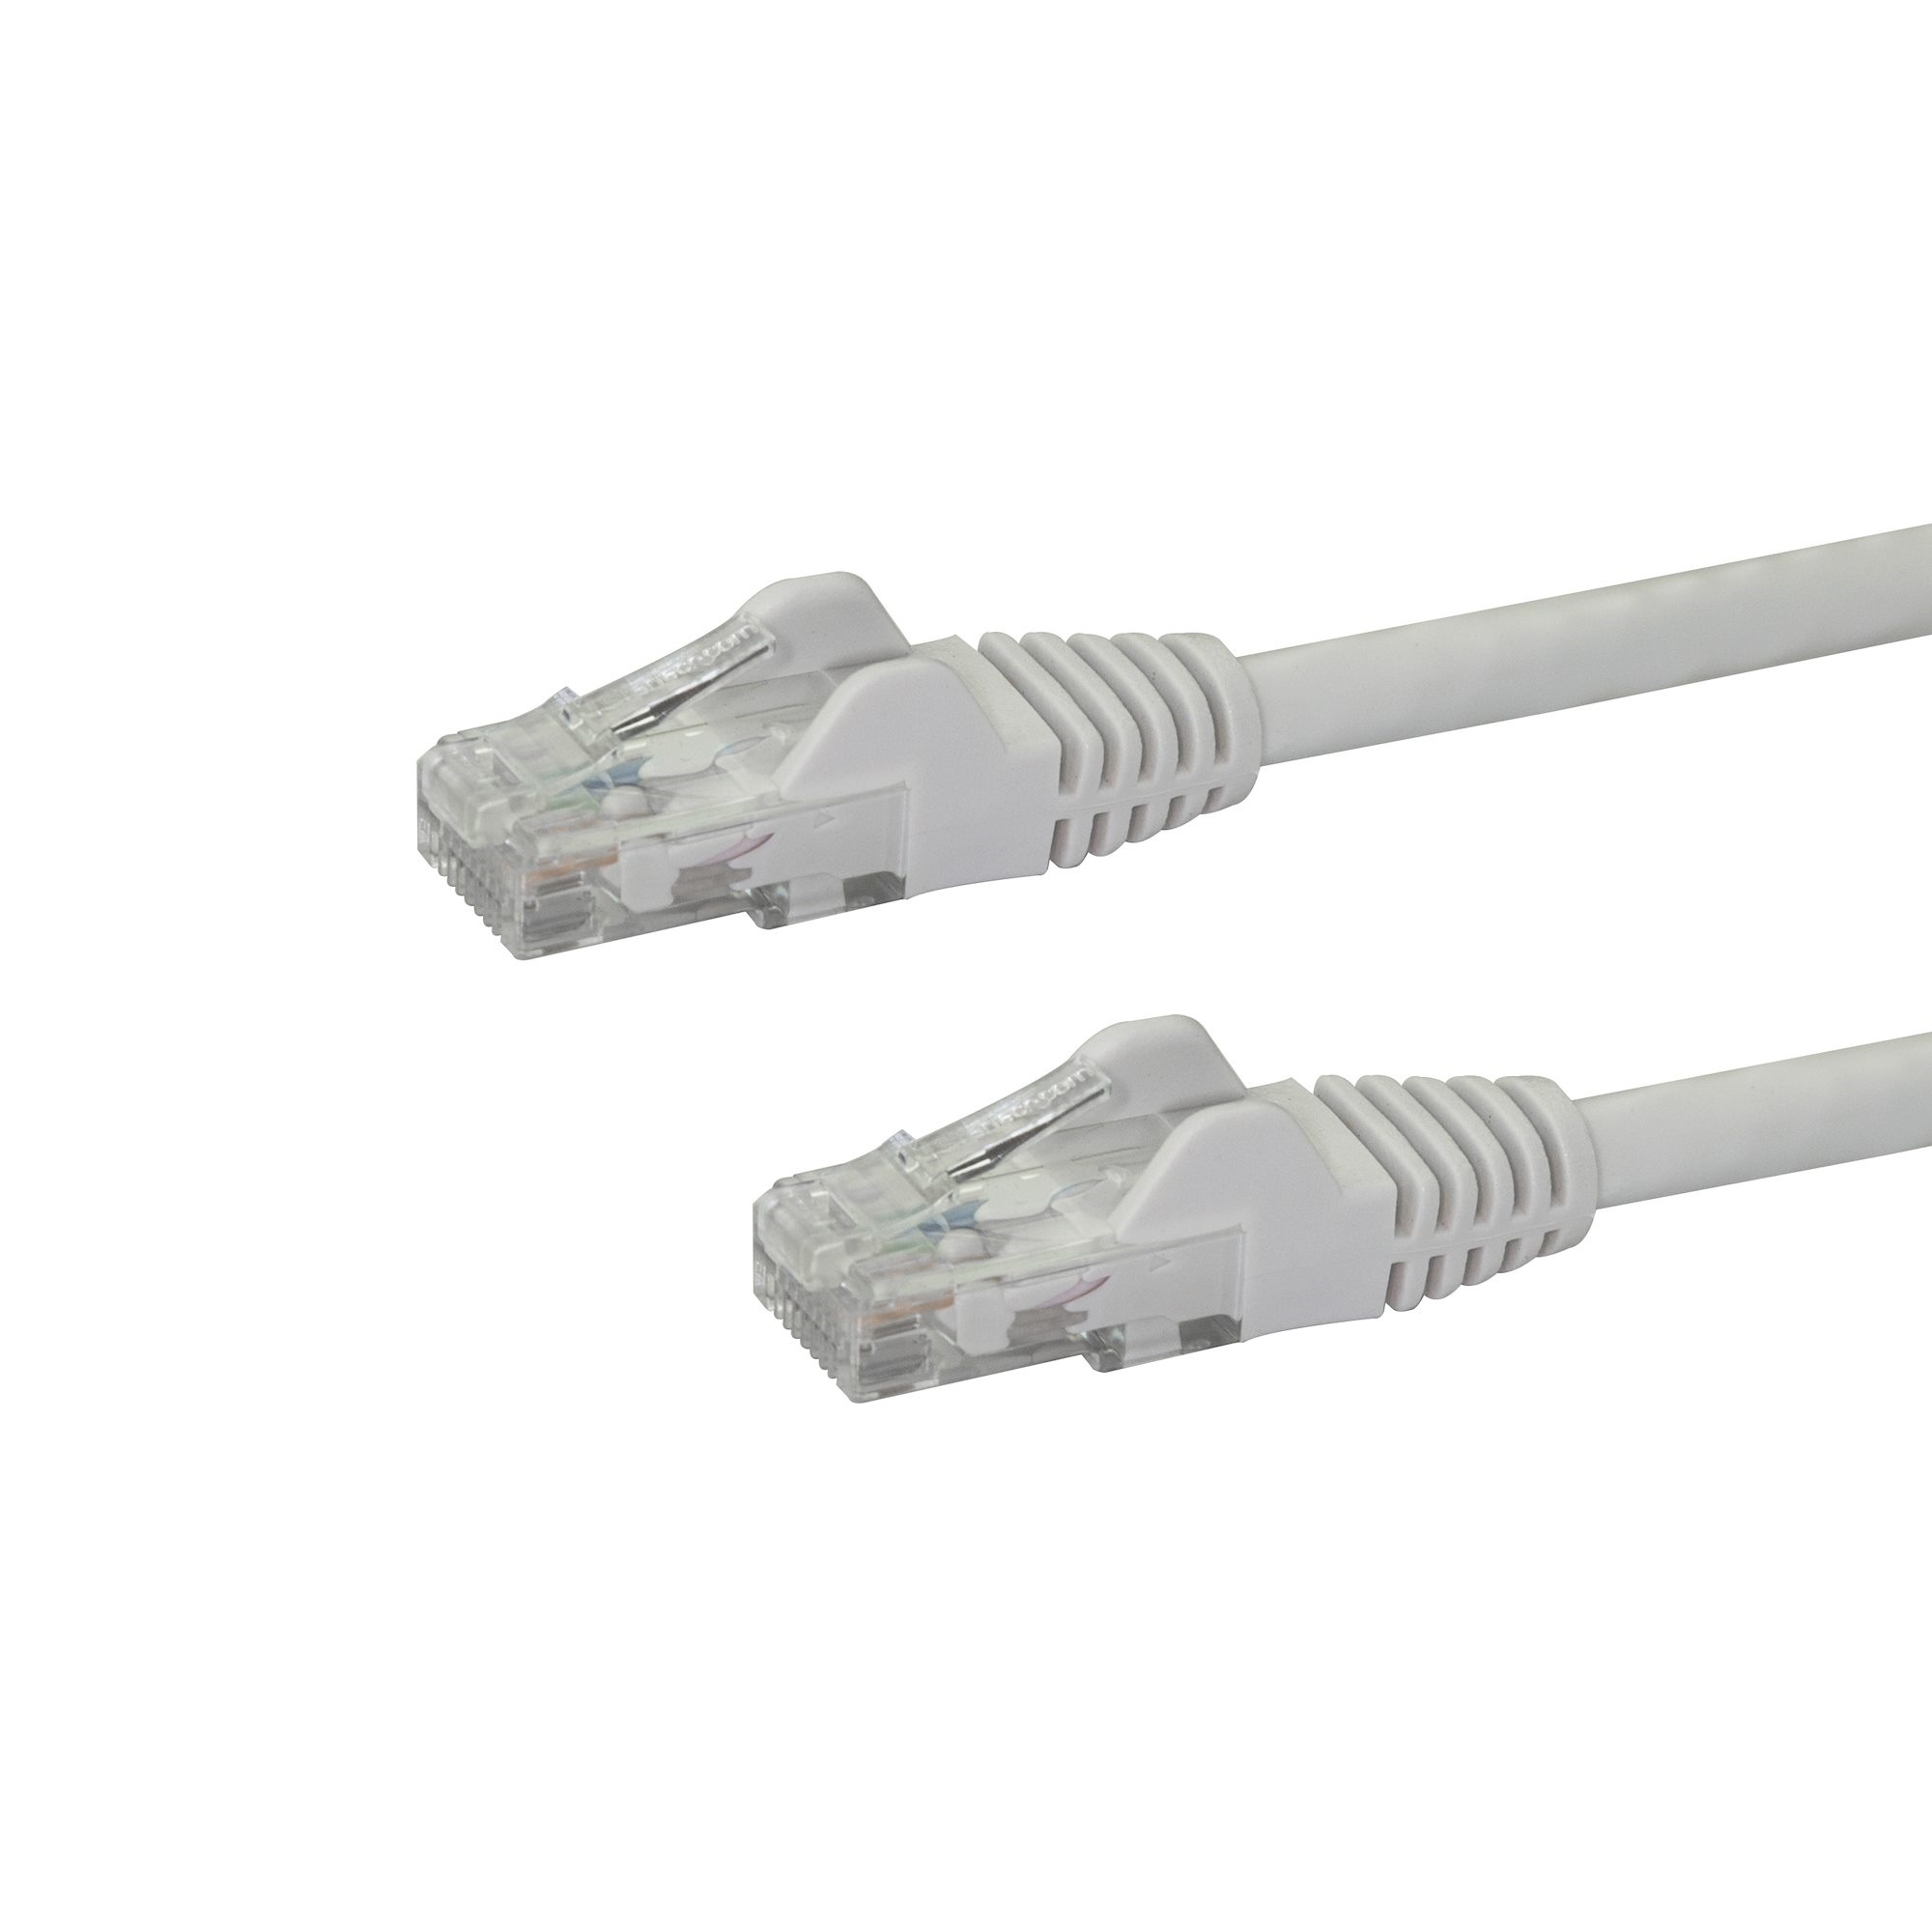 StarTech Snagless UTP Cat6 Patch Cable (White, 1m)